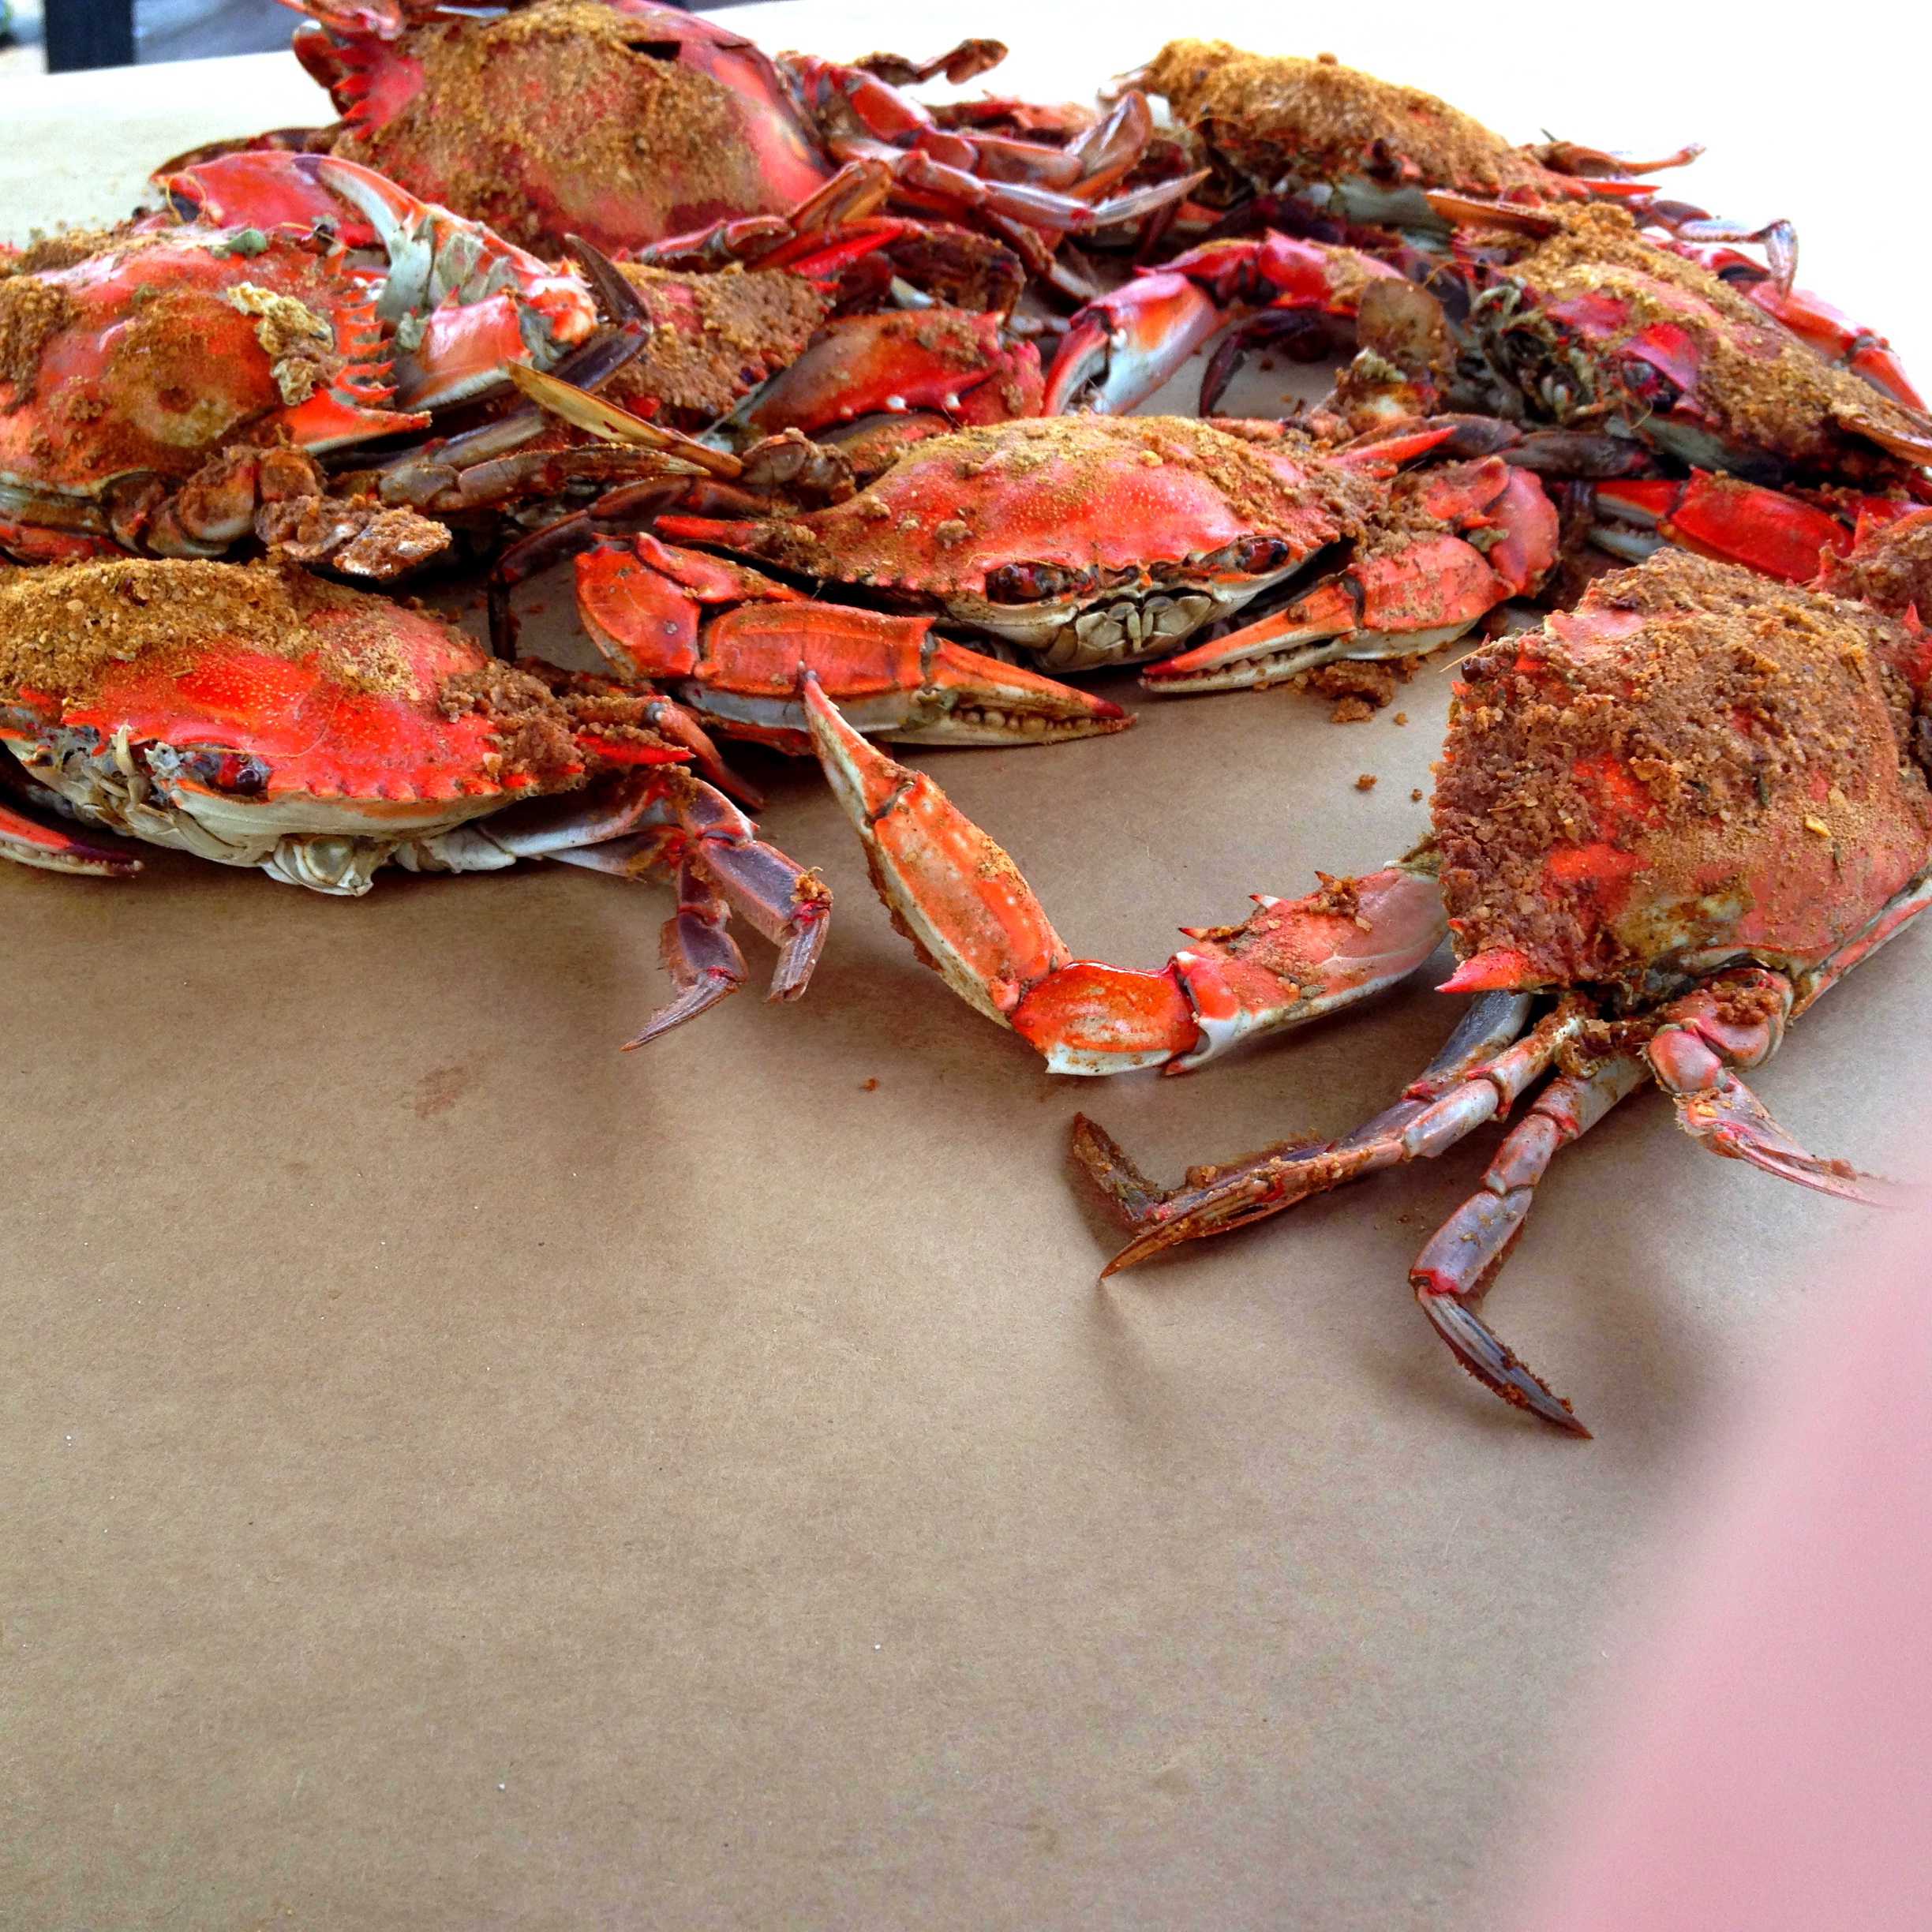 Our supper guests were crabby.